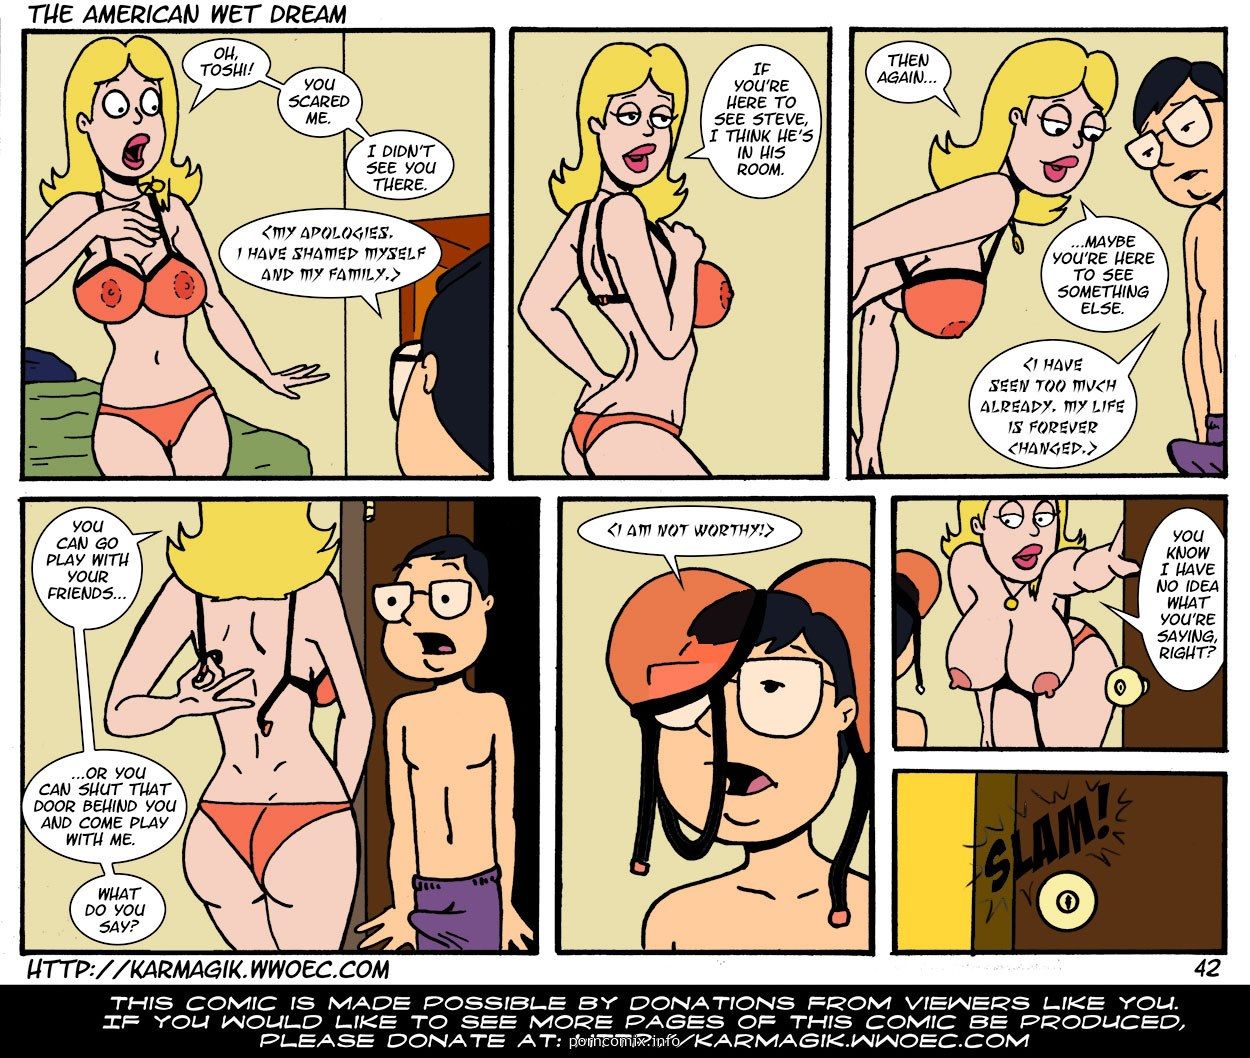 The American Wet Dream (American Dad) page 42